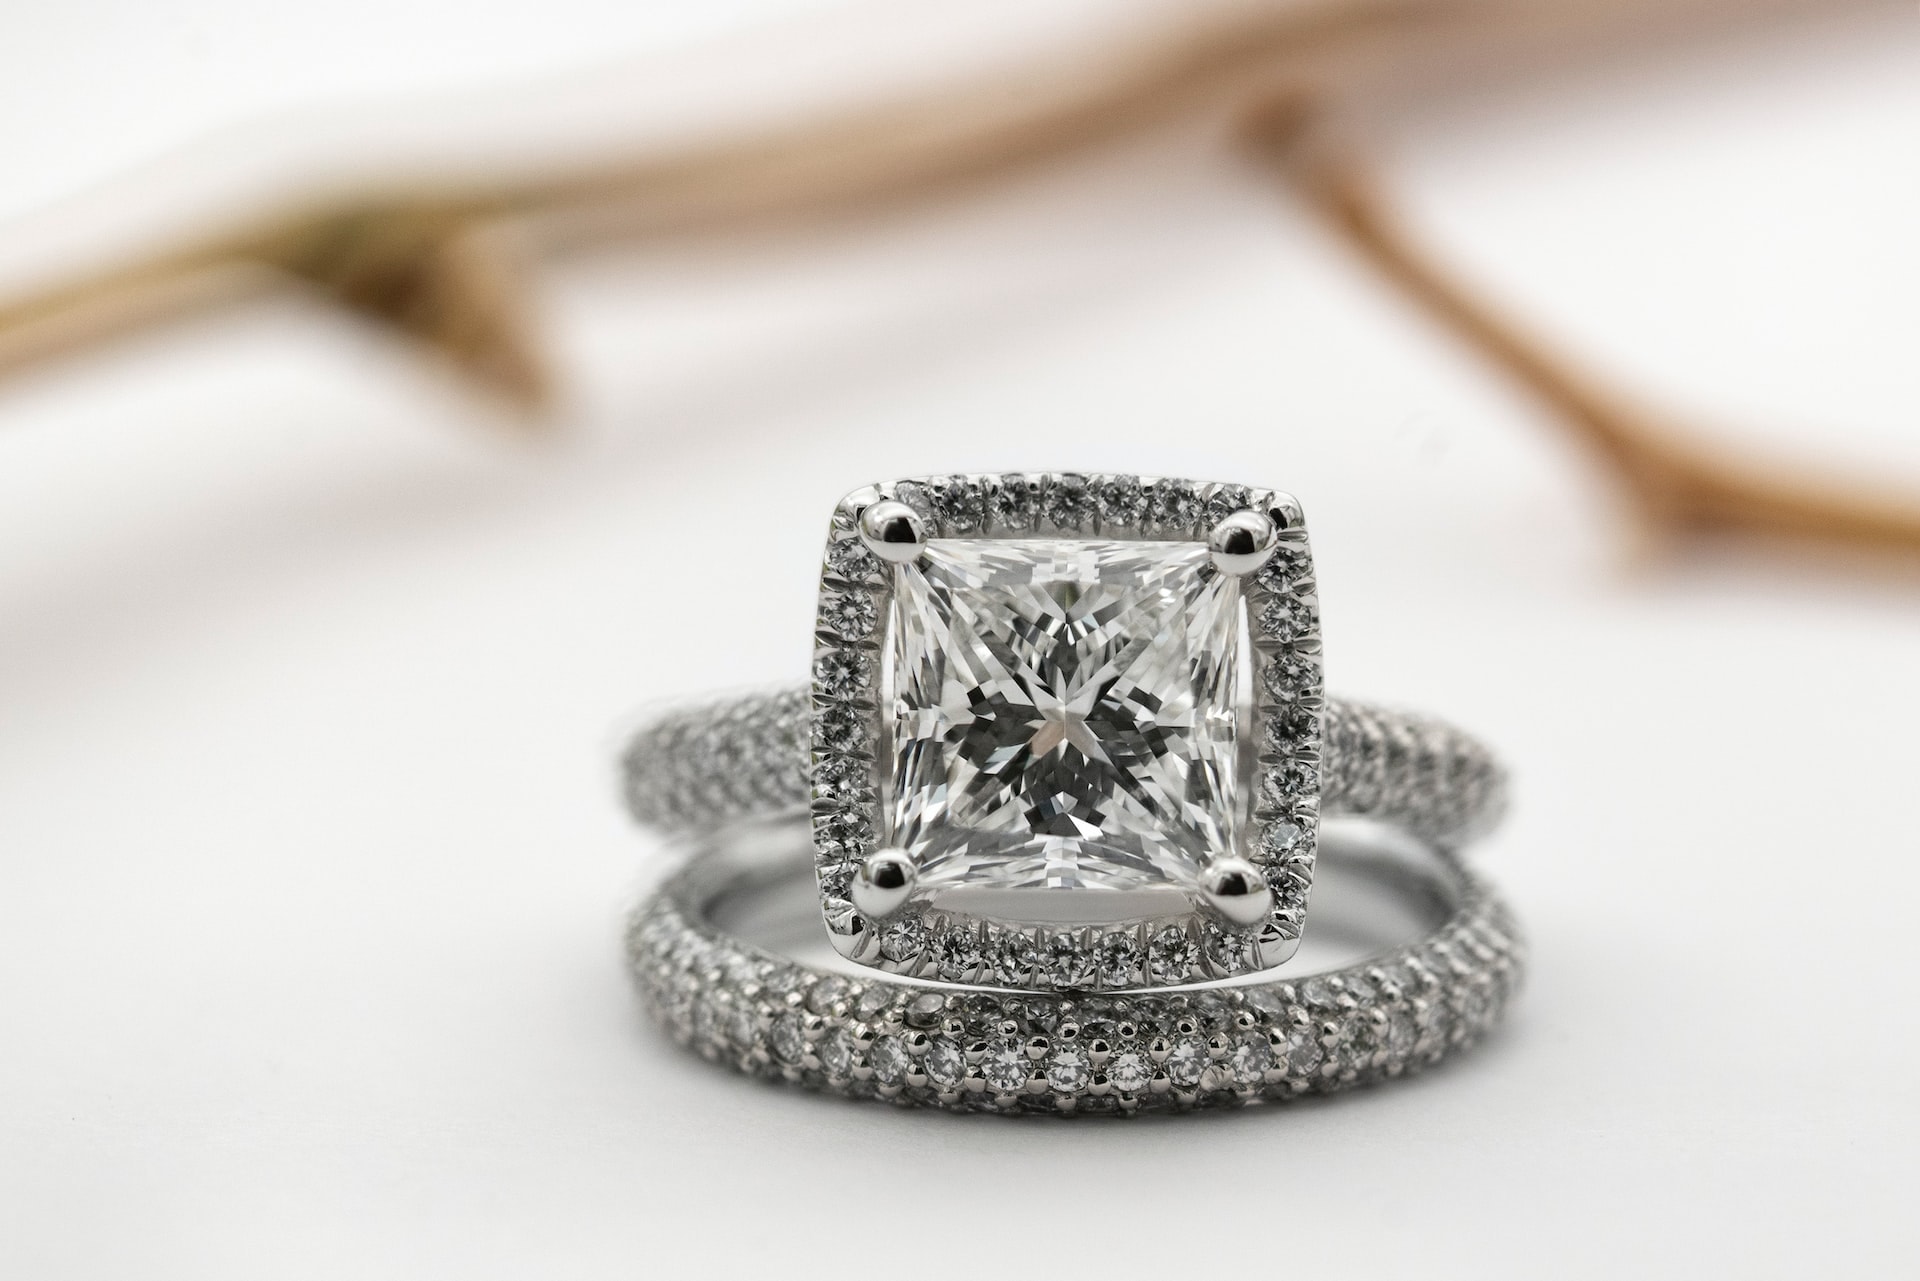 The Pave Diamond series: The most elegant accessories for your dress